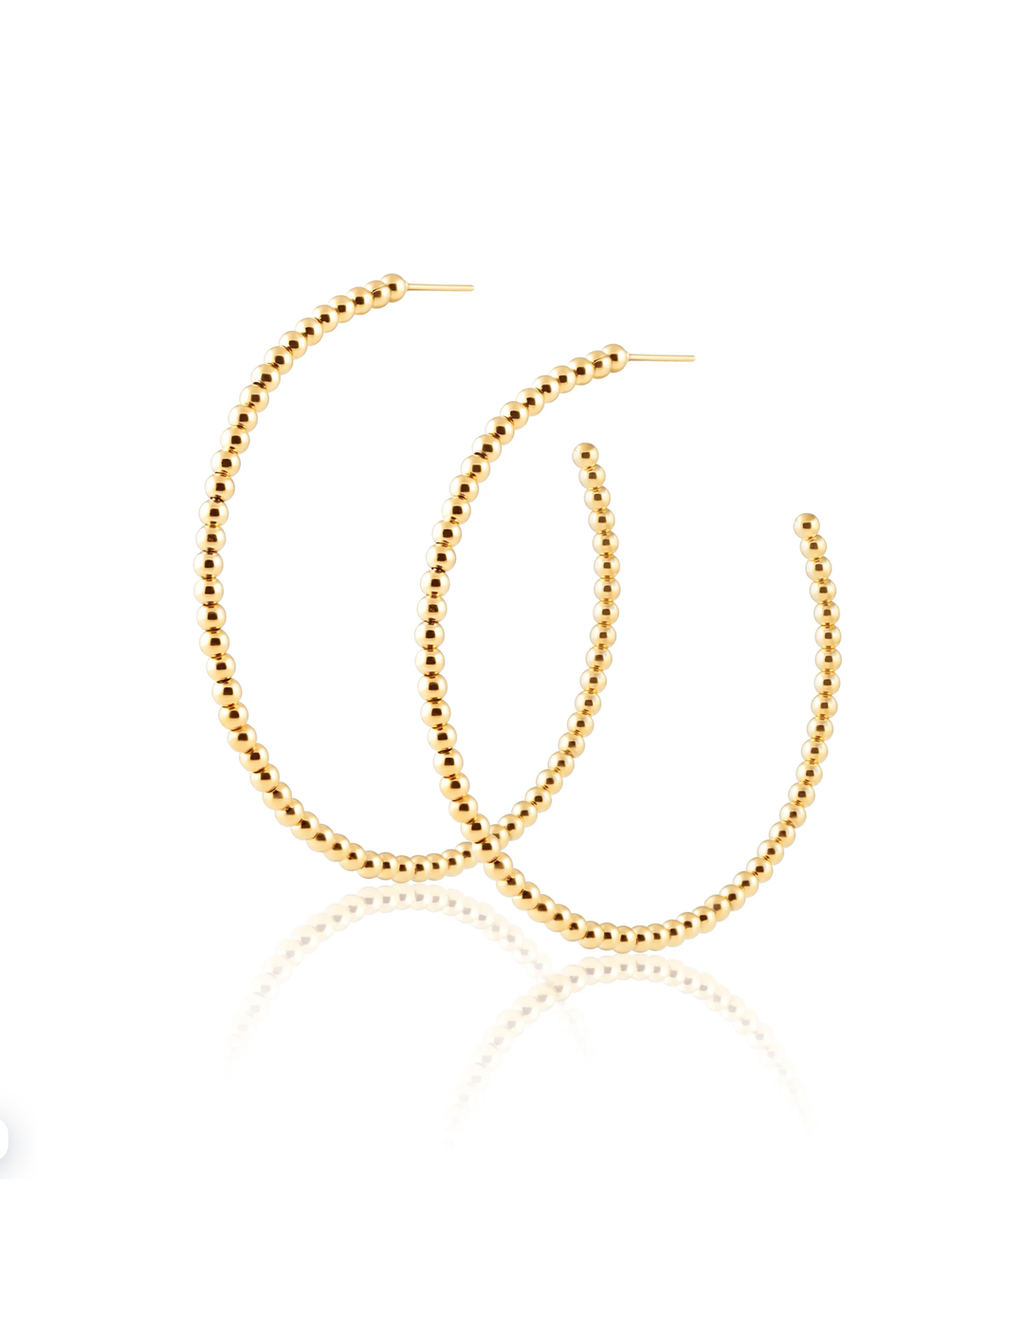 Chelsea Beaded Hoops, Gold Plated